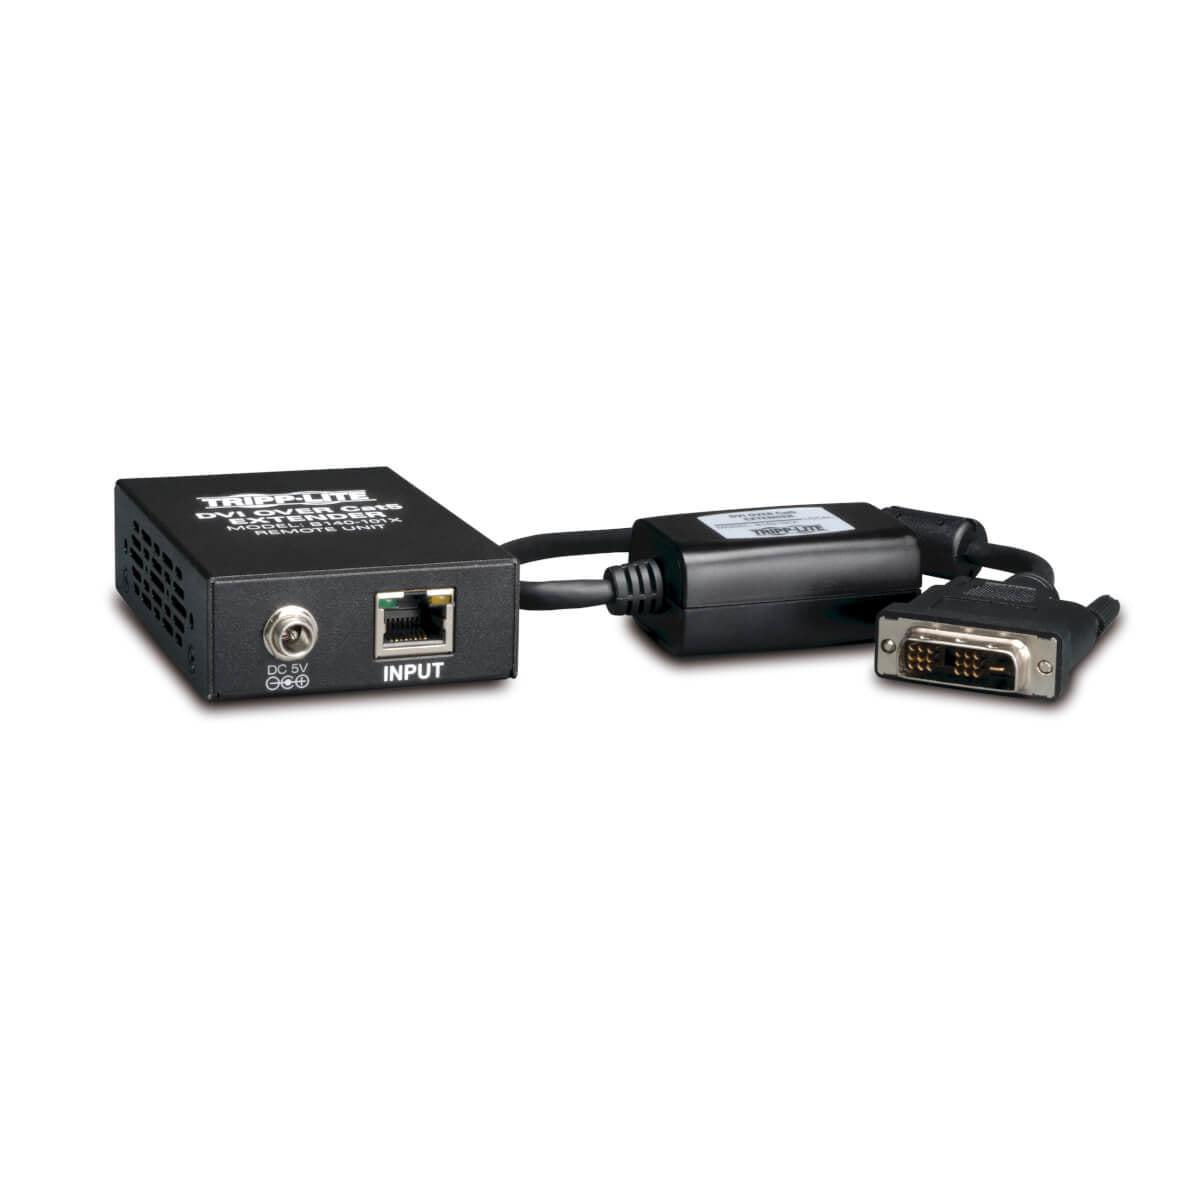 Tripp Lite Dvi Over Cat5/Cat6 Active Extender Kit, Box-Style Video Transmitter & Receiver, 1920X1080 At 60Hz, Up To 61 M (200-Ft.)